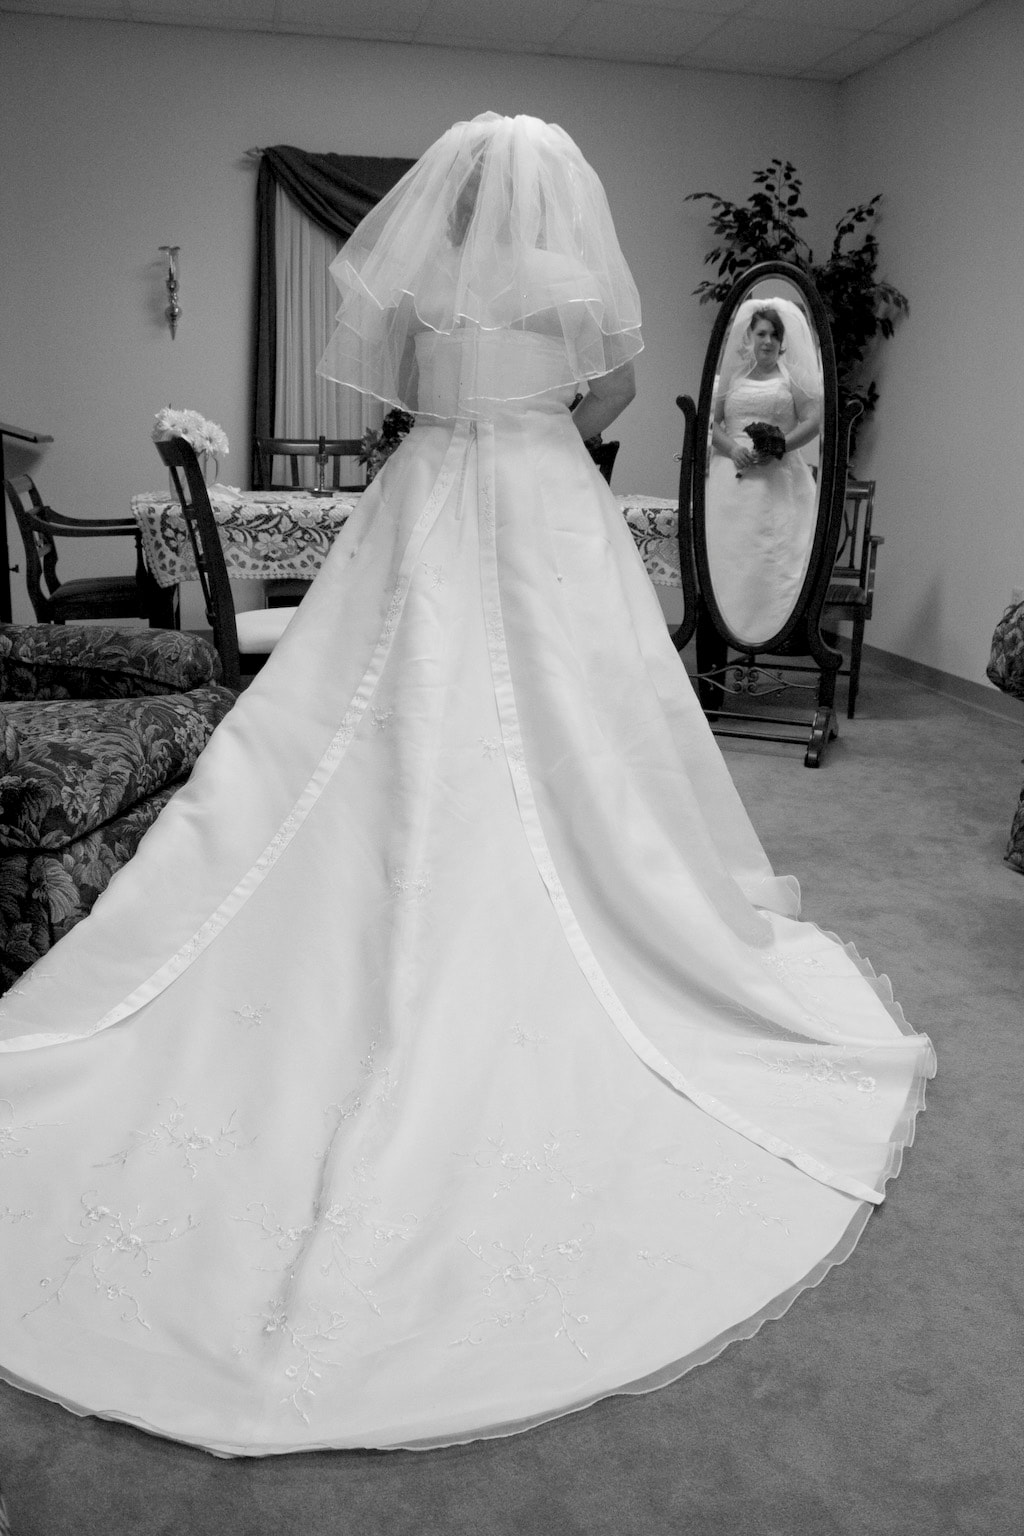 Black and White of Bride standing in front of mirror with reflection